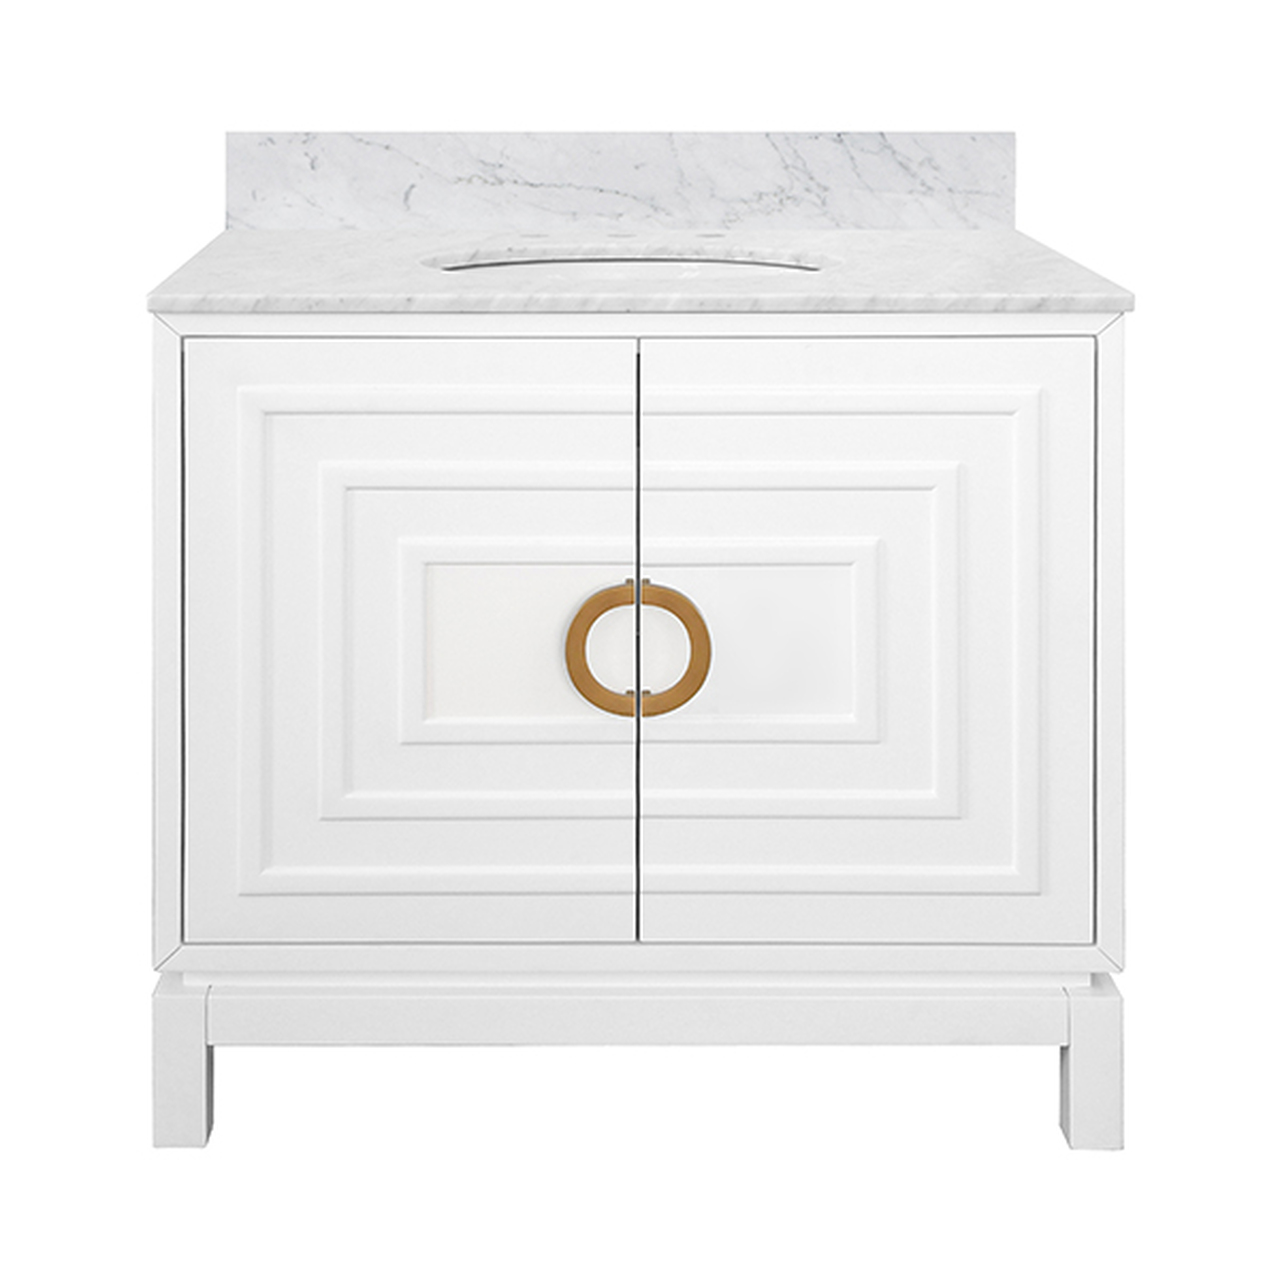 36" Issac Edwards Collection Bath Vanity in Matte White Finsih with White Marble Top and Porcelain Sink